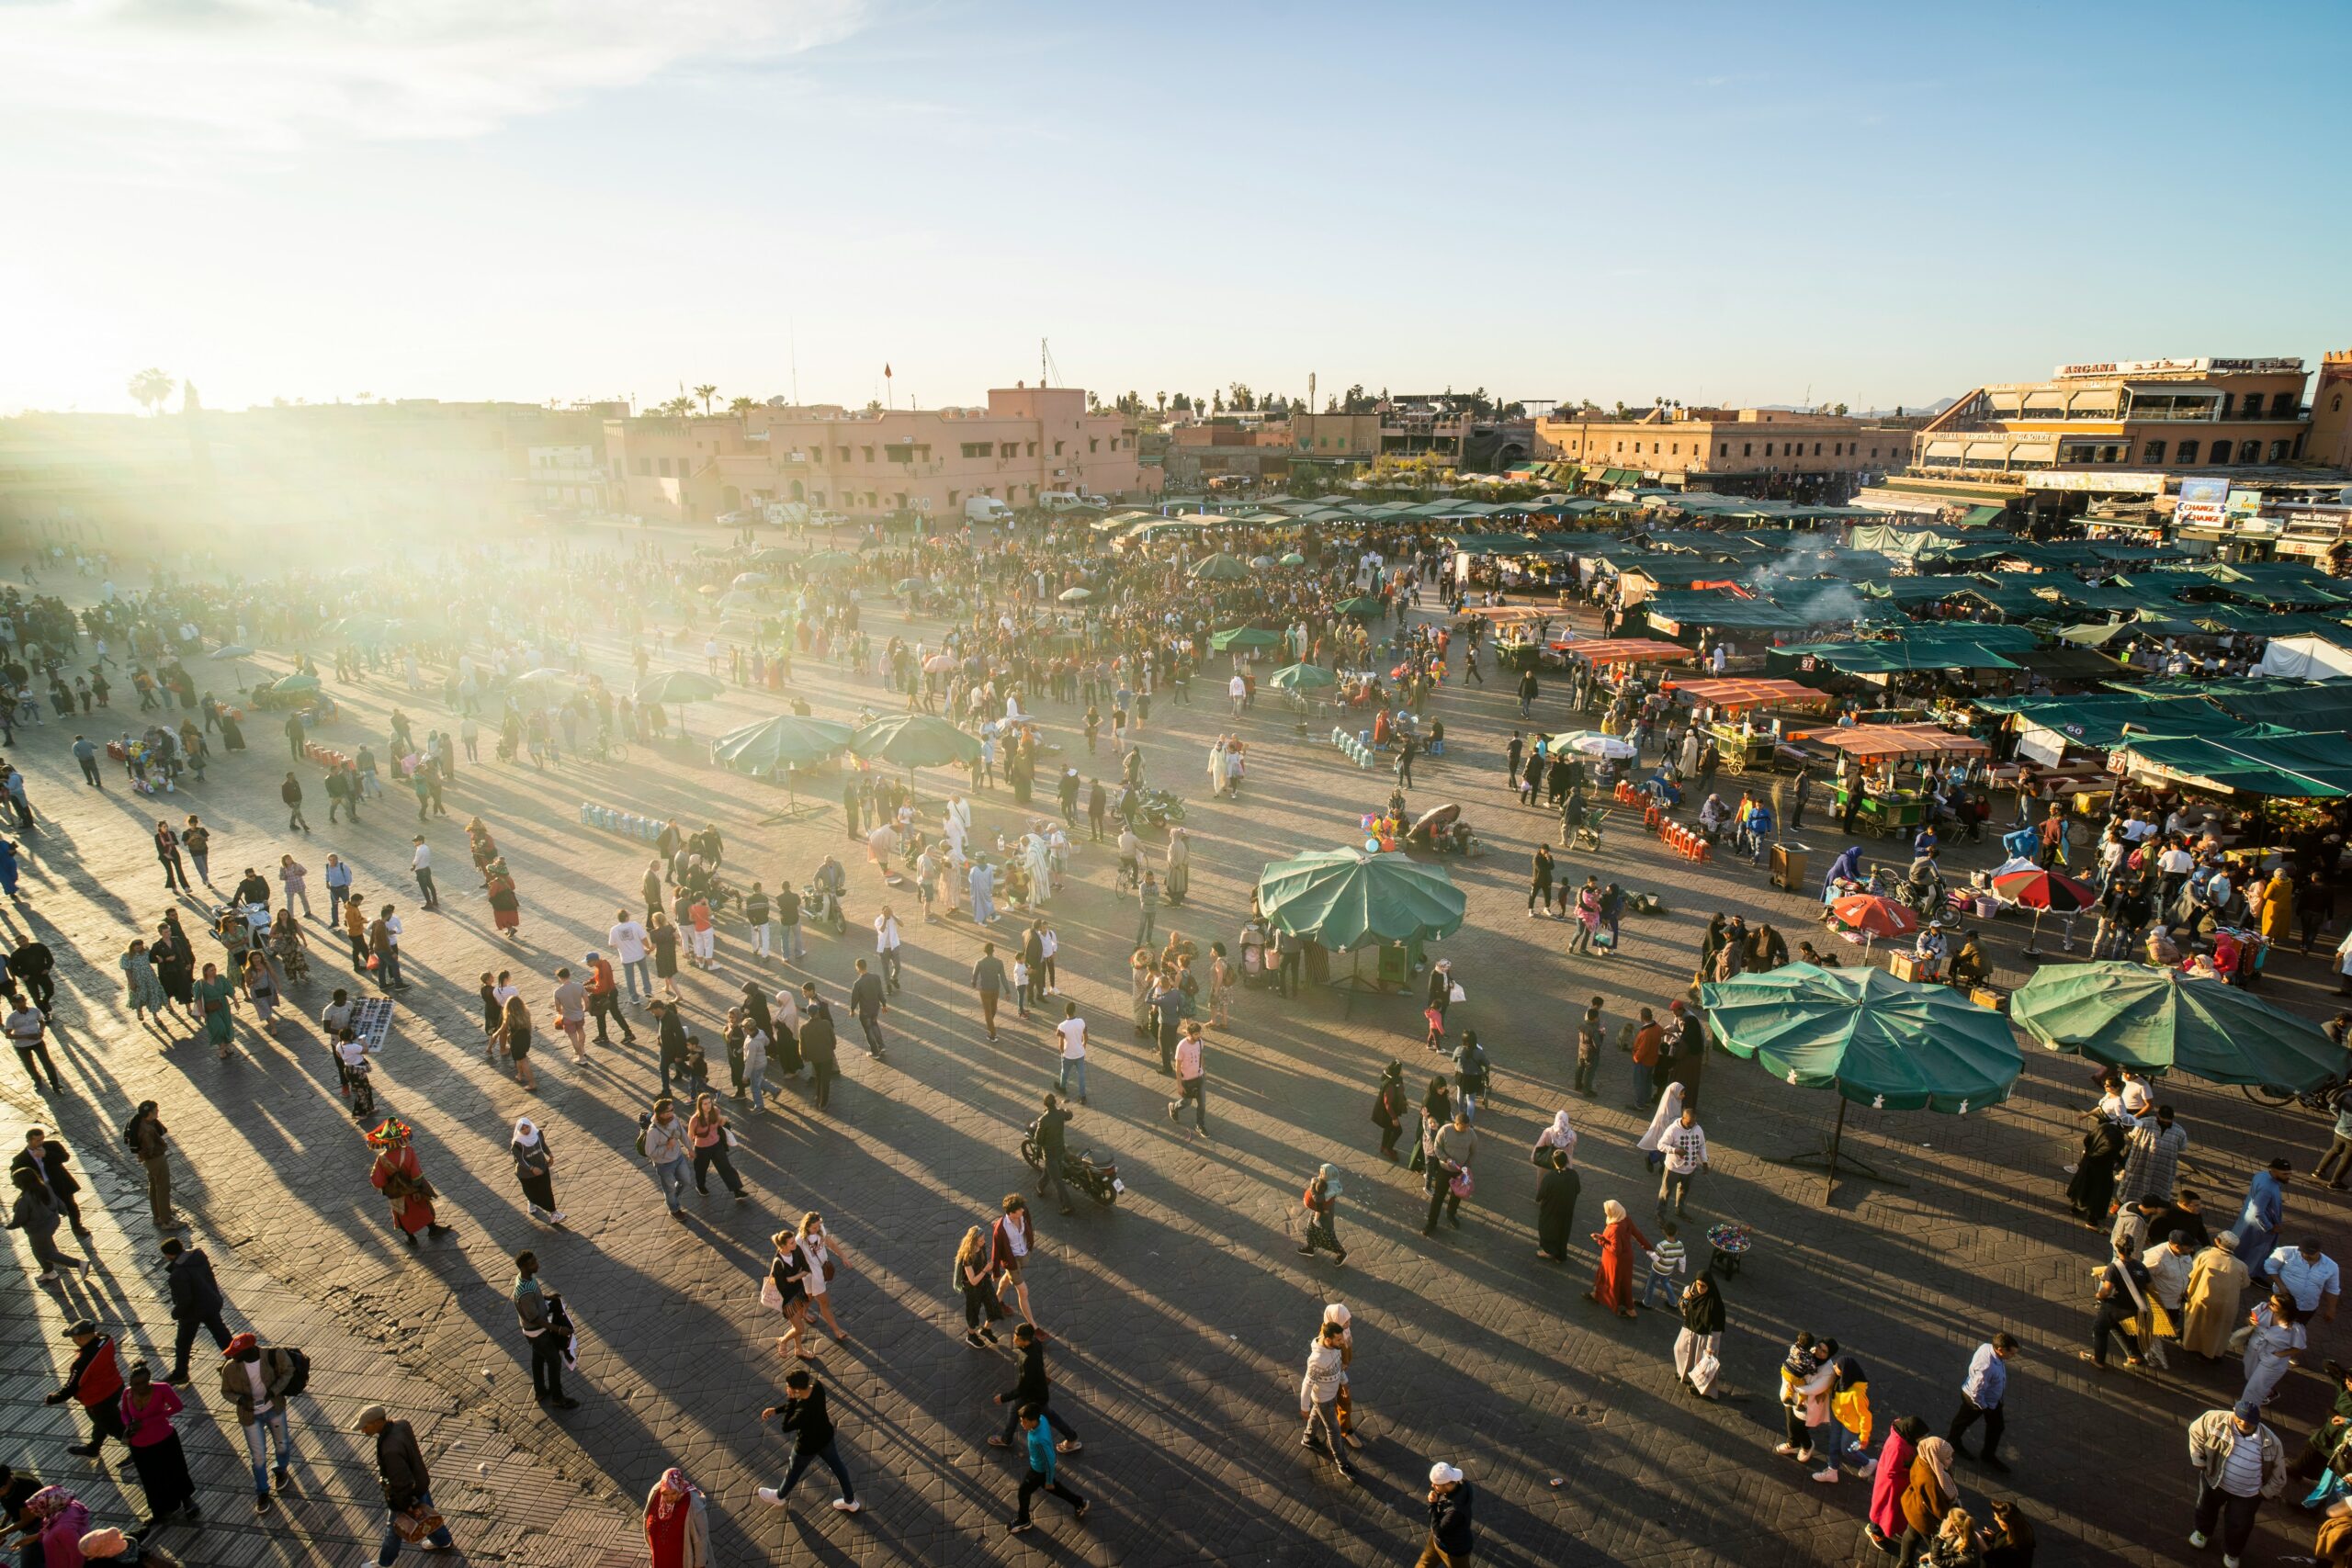 Morocco is ranked second on the list of African countries that receive the most tourists